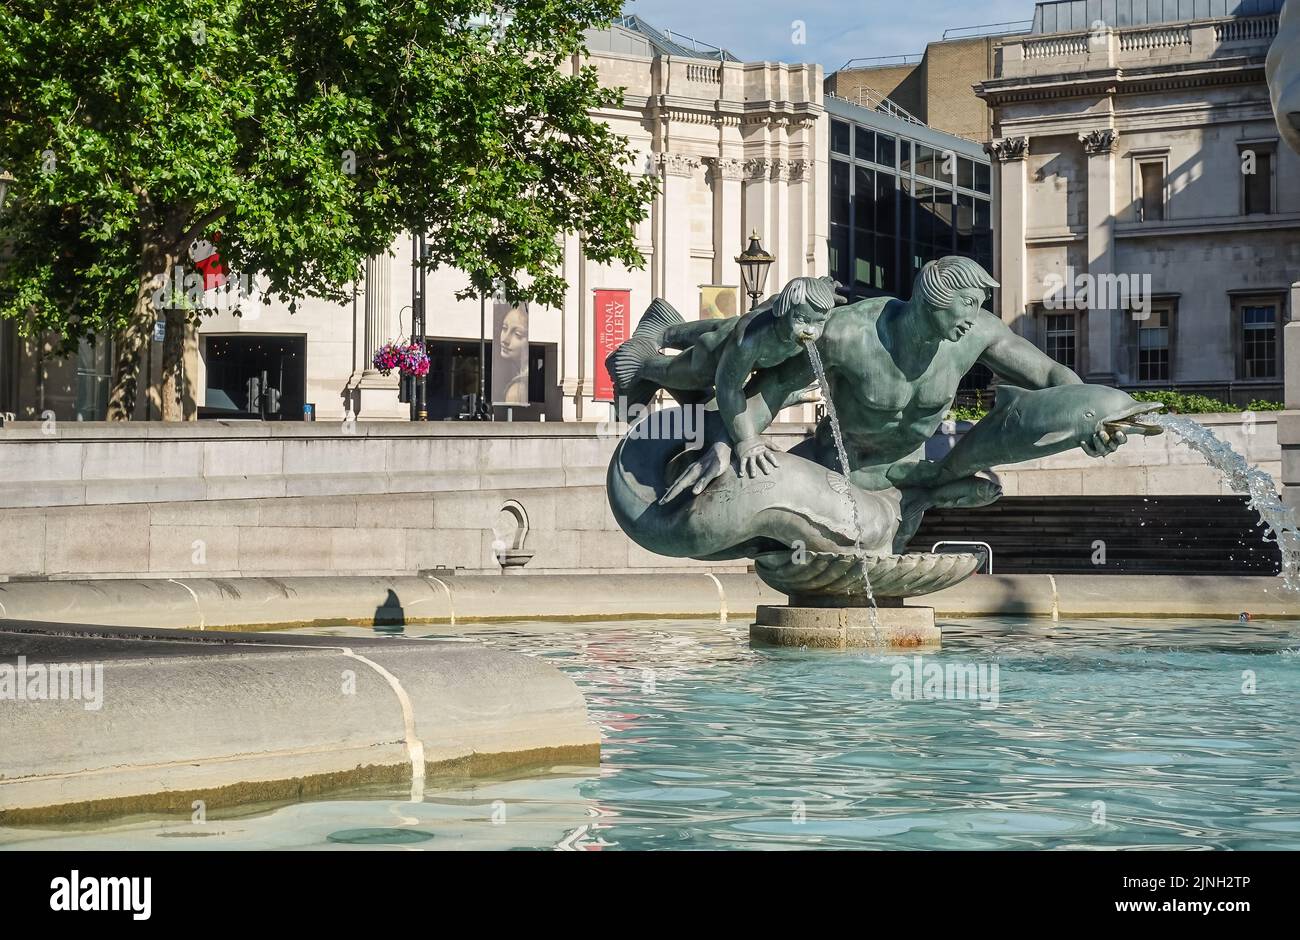 London, UK- July 4, 2022: Trafalgar Square. Mermain statue in western pool-fountain with greenf foliage and part of National Gallery facade in back. Stock Photo